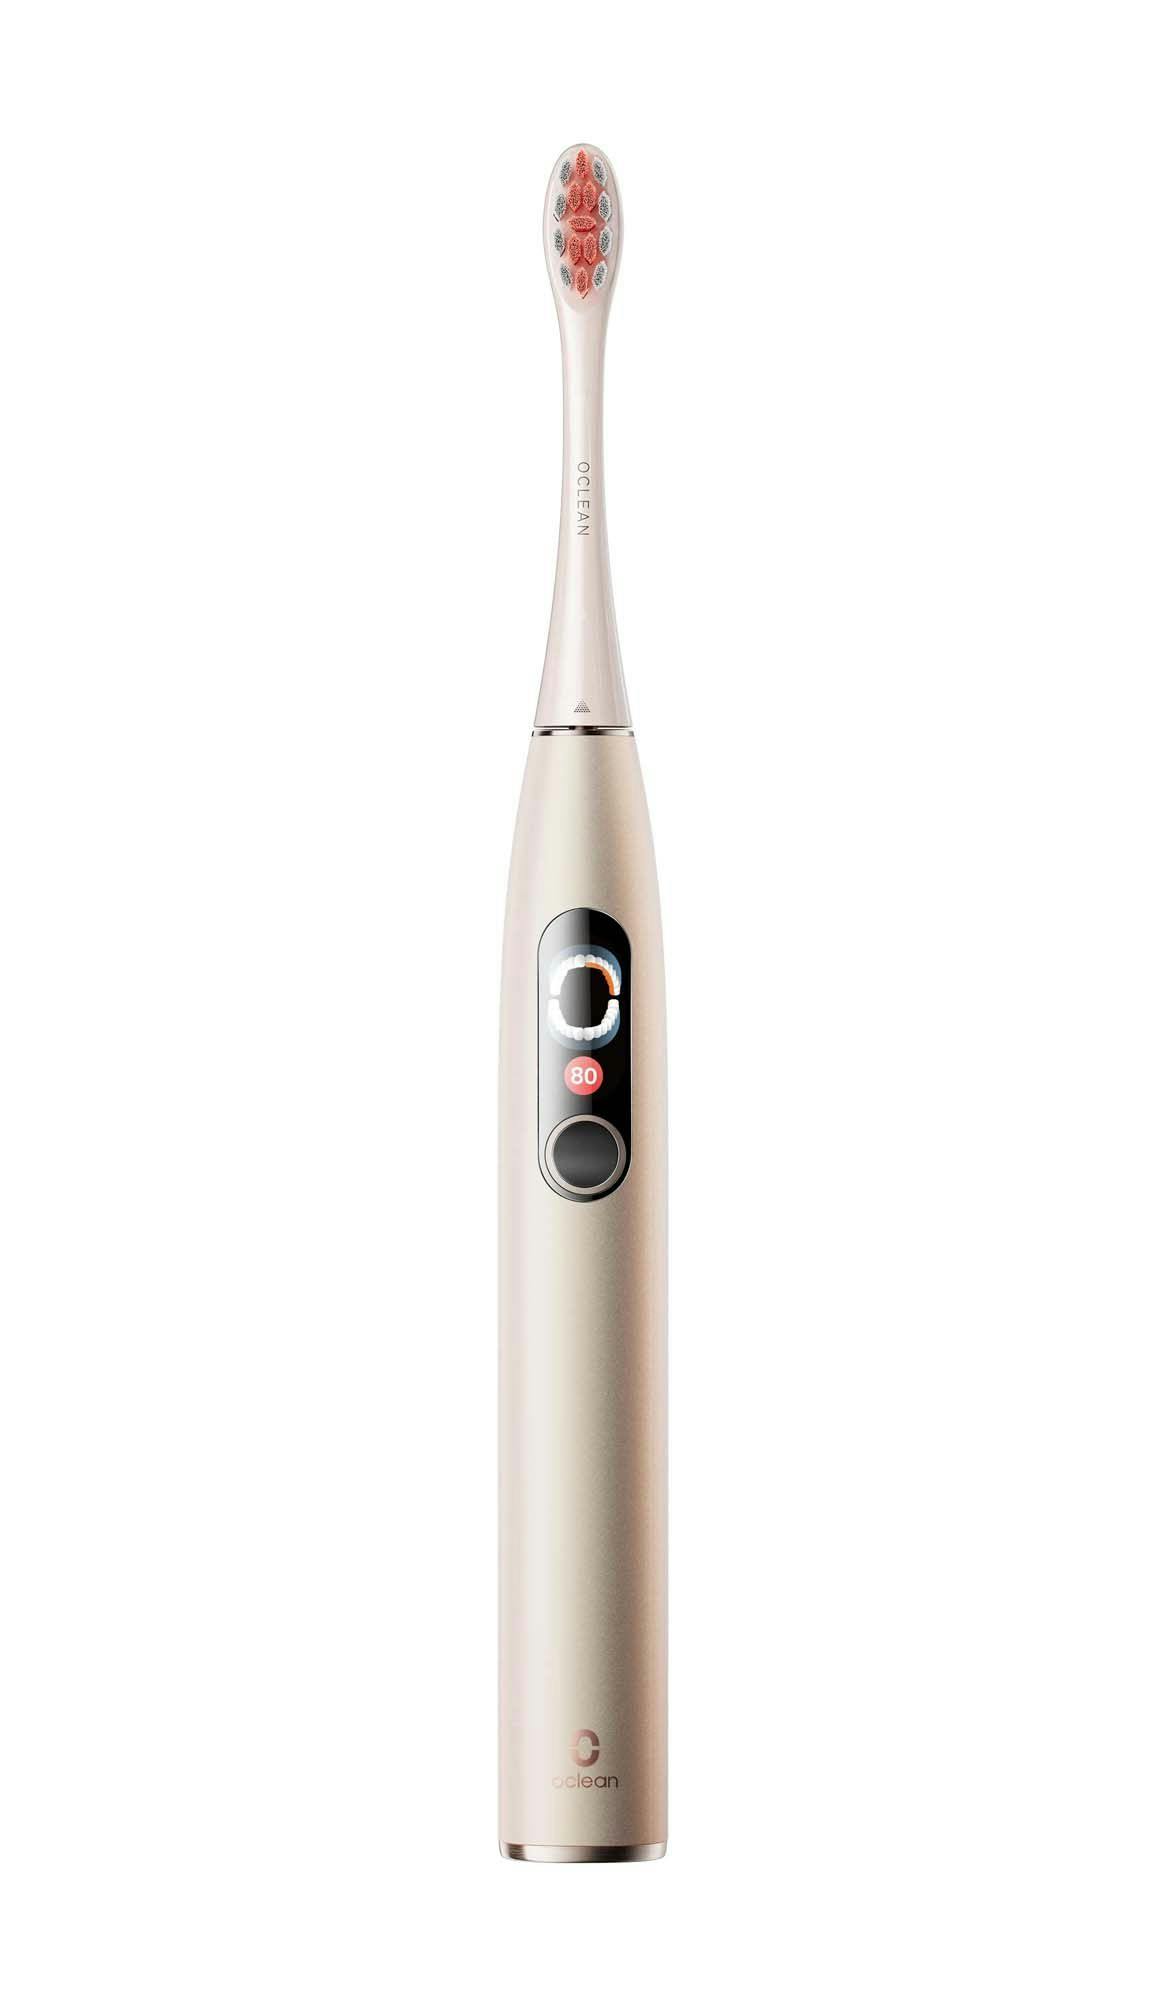 The Oclean X Pro Digital Smart Sonic Toothbrush uses a gyroscope sensor to track 8 areas in real-time brushing behaviors and identify any missed areas to improve user oral health. | Image Credit: © Oclean